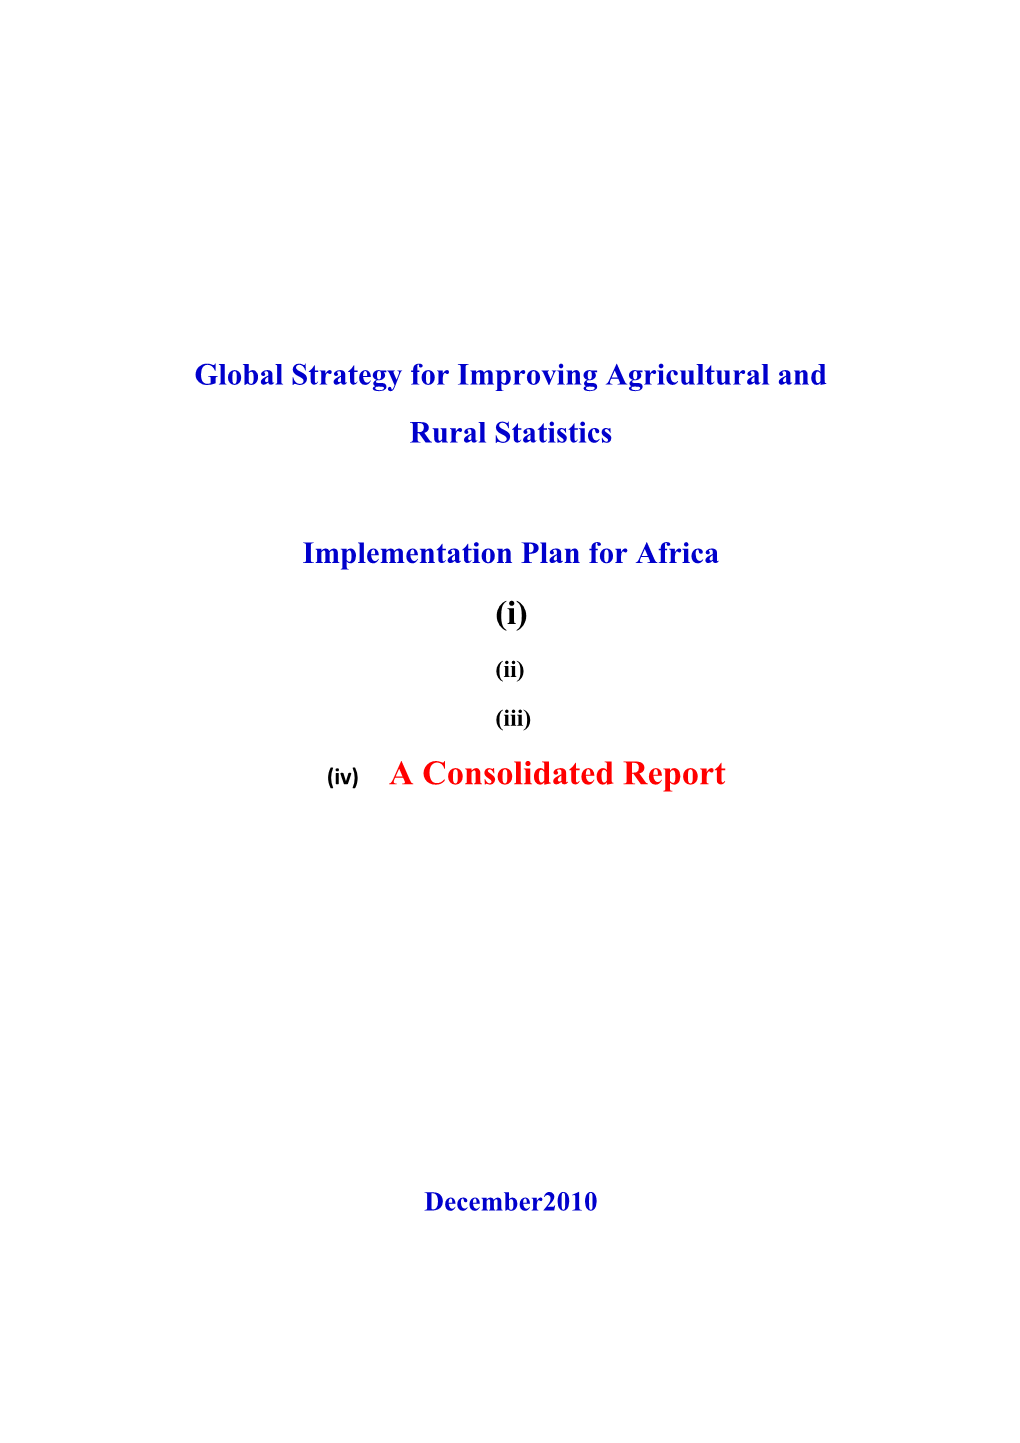 Summary of the Implementation Plan for Africa